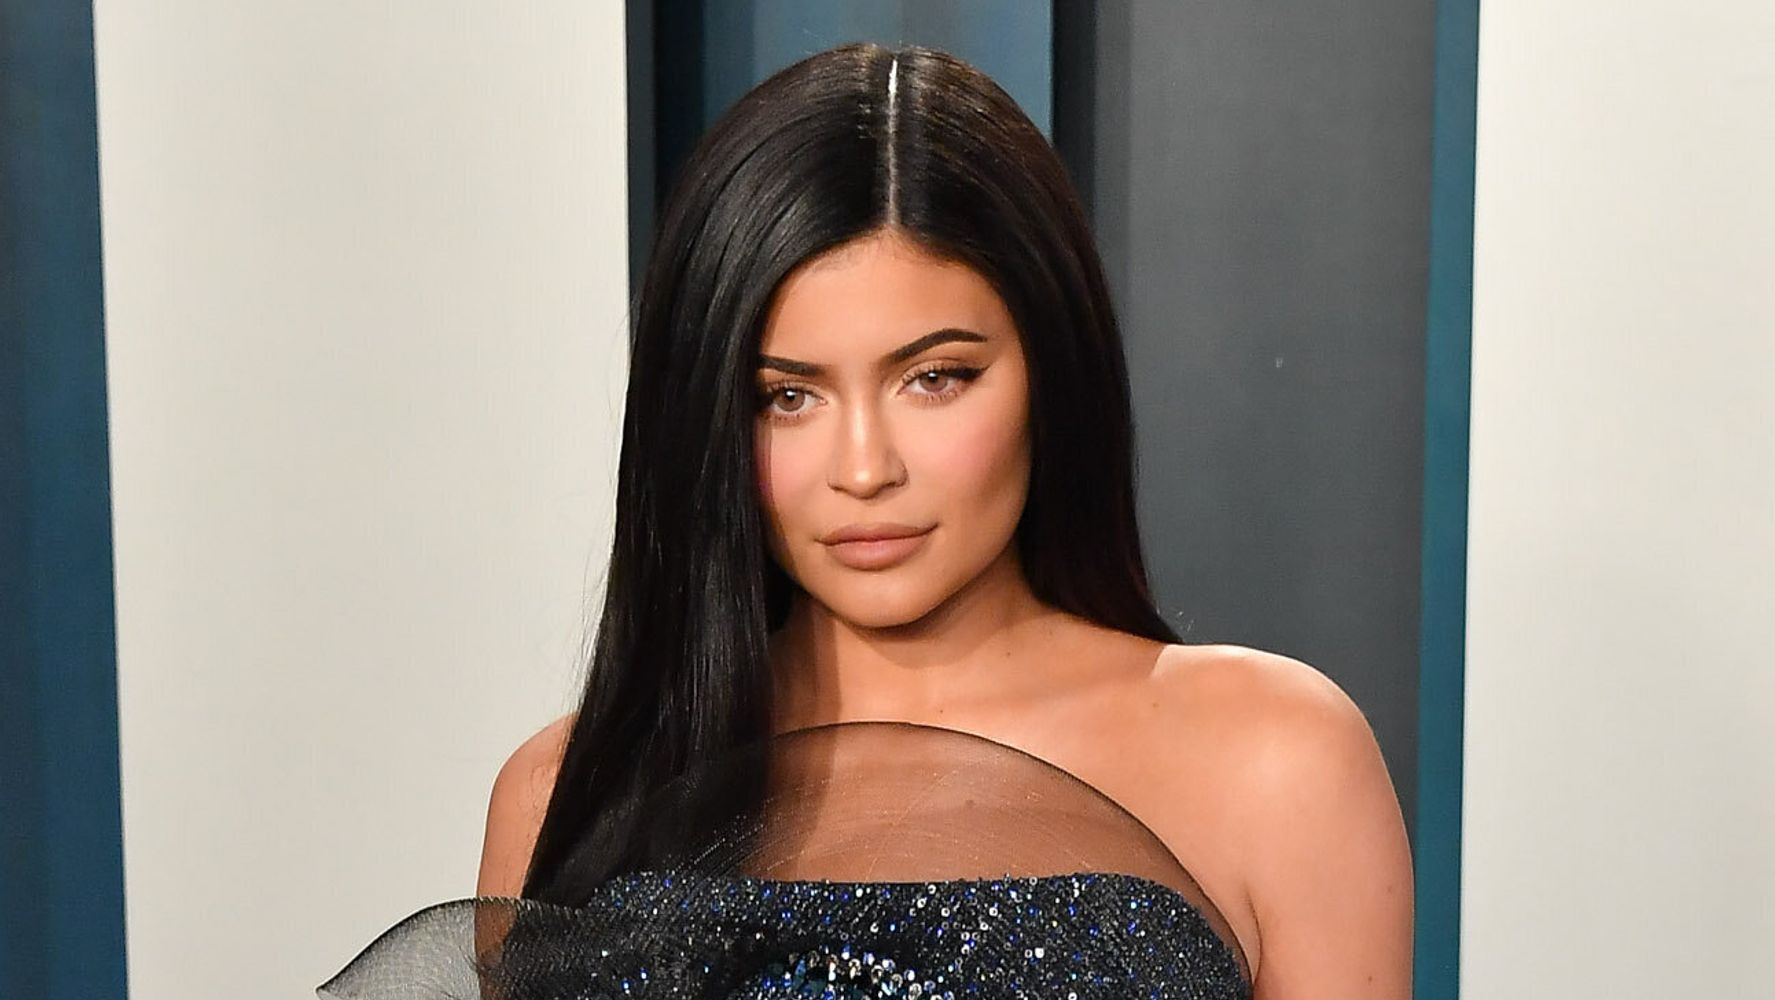 Kylie Jenner slapped for asking for donations to pay for the stylist’s surgery